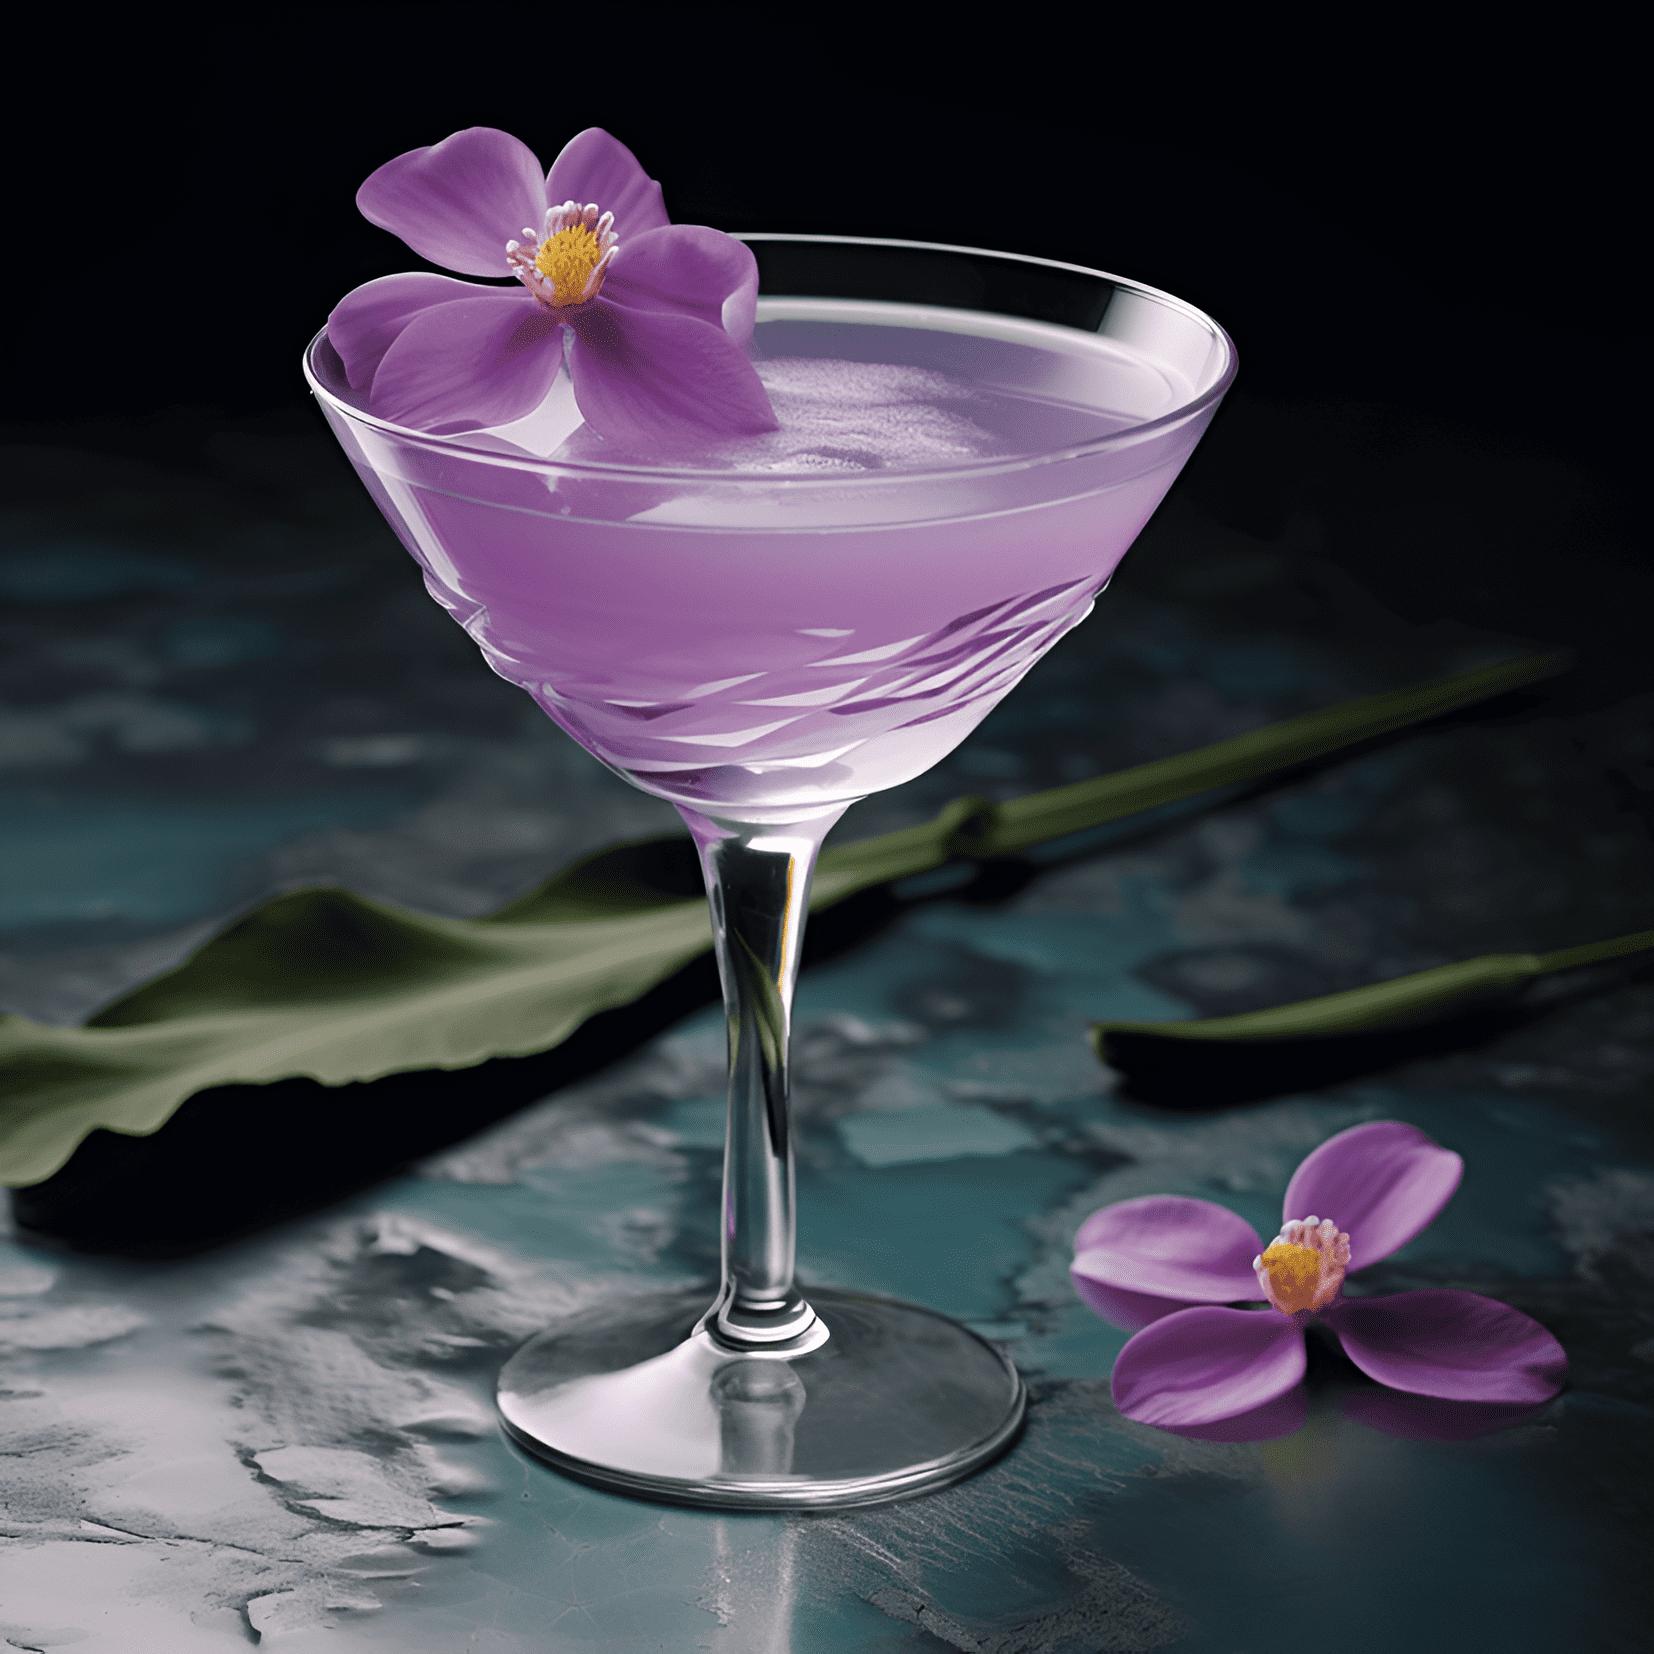 Water Lily Cocktail Recipe - The Water Lily cocktail has a harmonious balance of sweet, sour, and floral flavors. The combination of gin, Cointreau, crème de violette, and lemon juice creates a light and refreshing taste with a subtle hint of citrus and a delicate floral undertone.